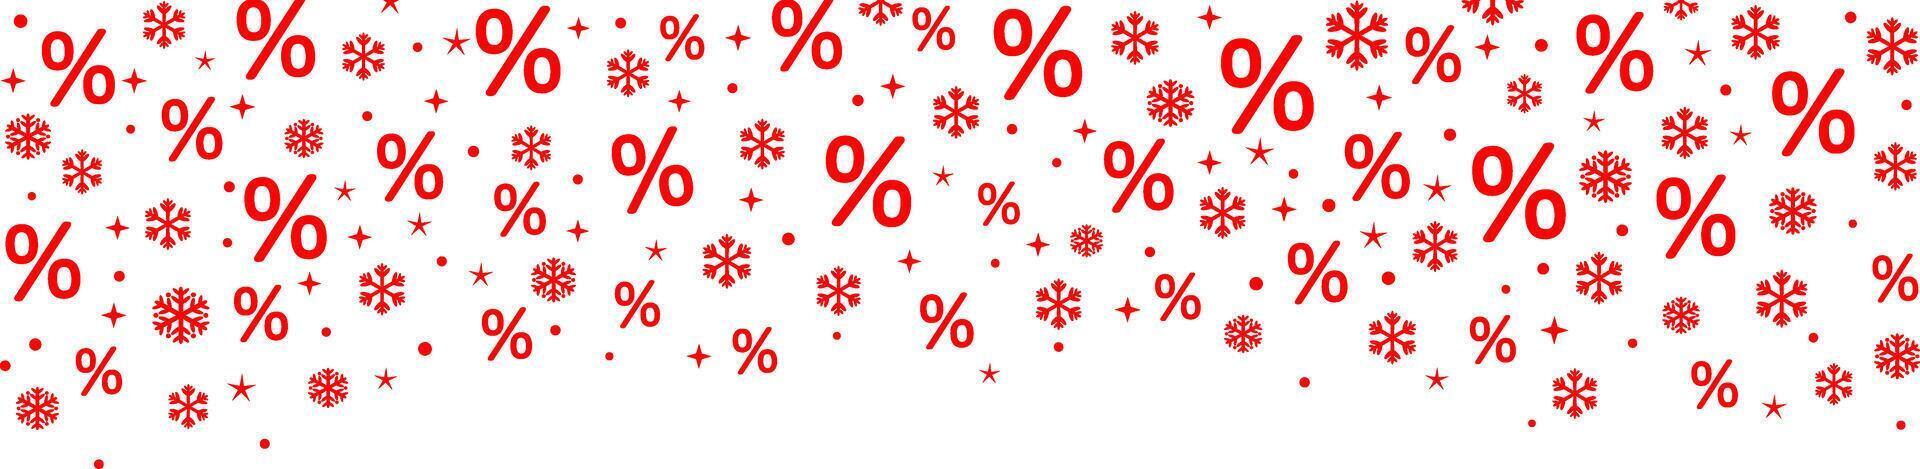 Winter sale border, discount banner with snowflakes, holiday promotion concept design vector